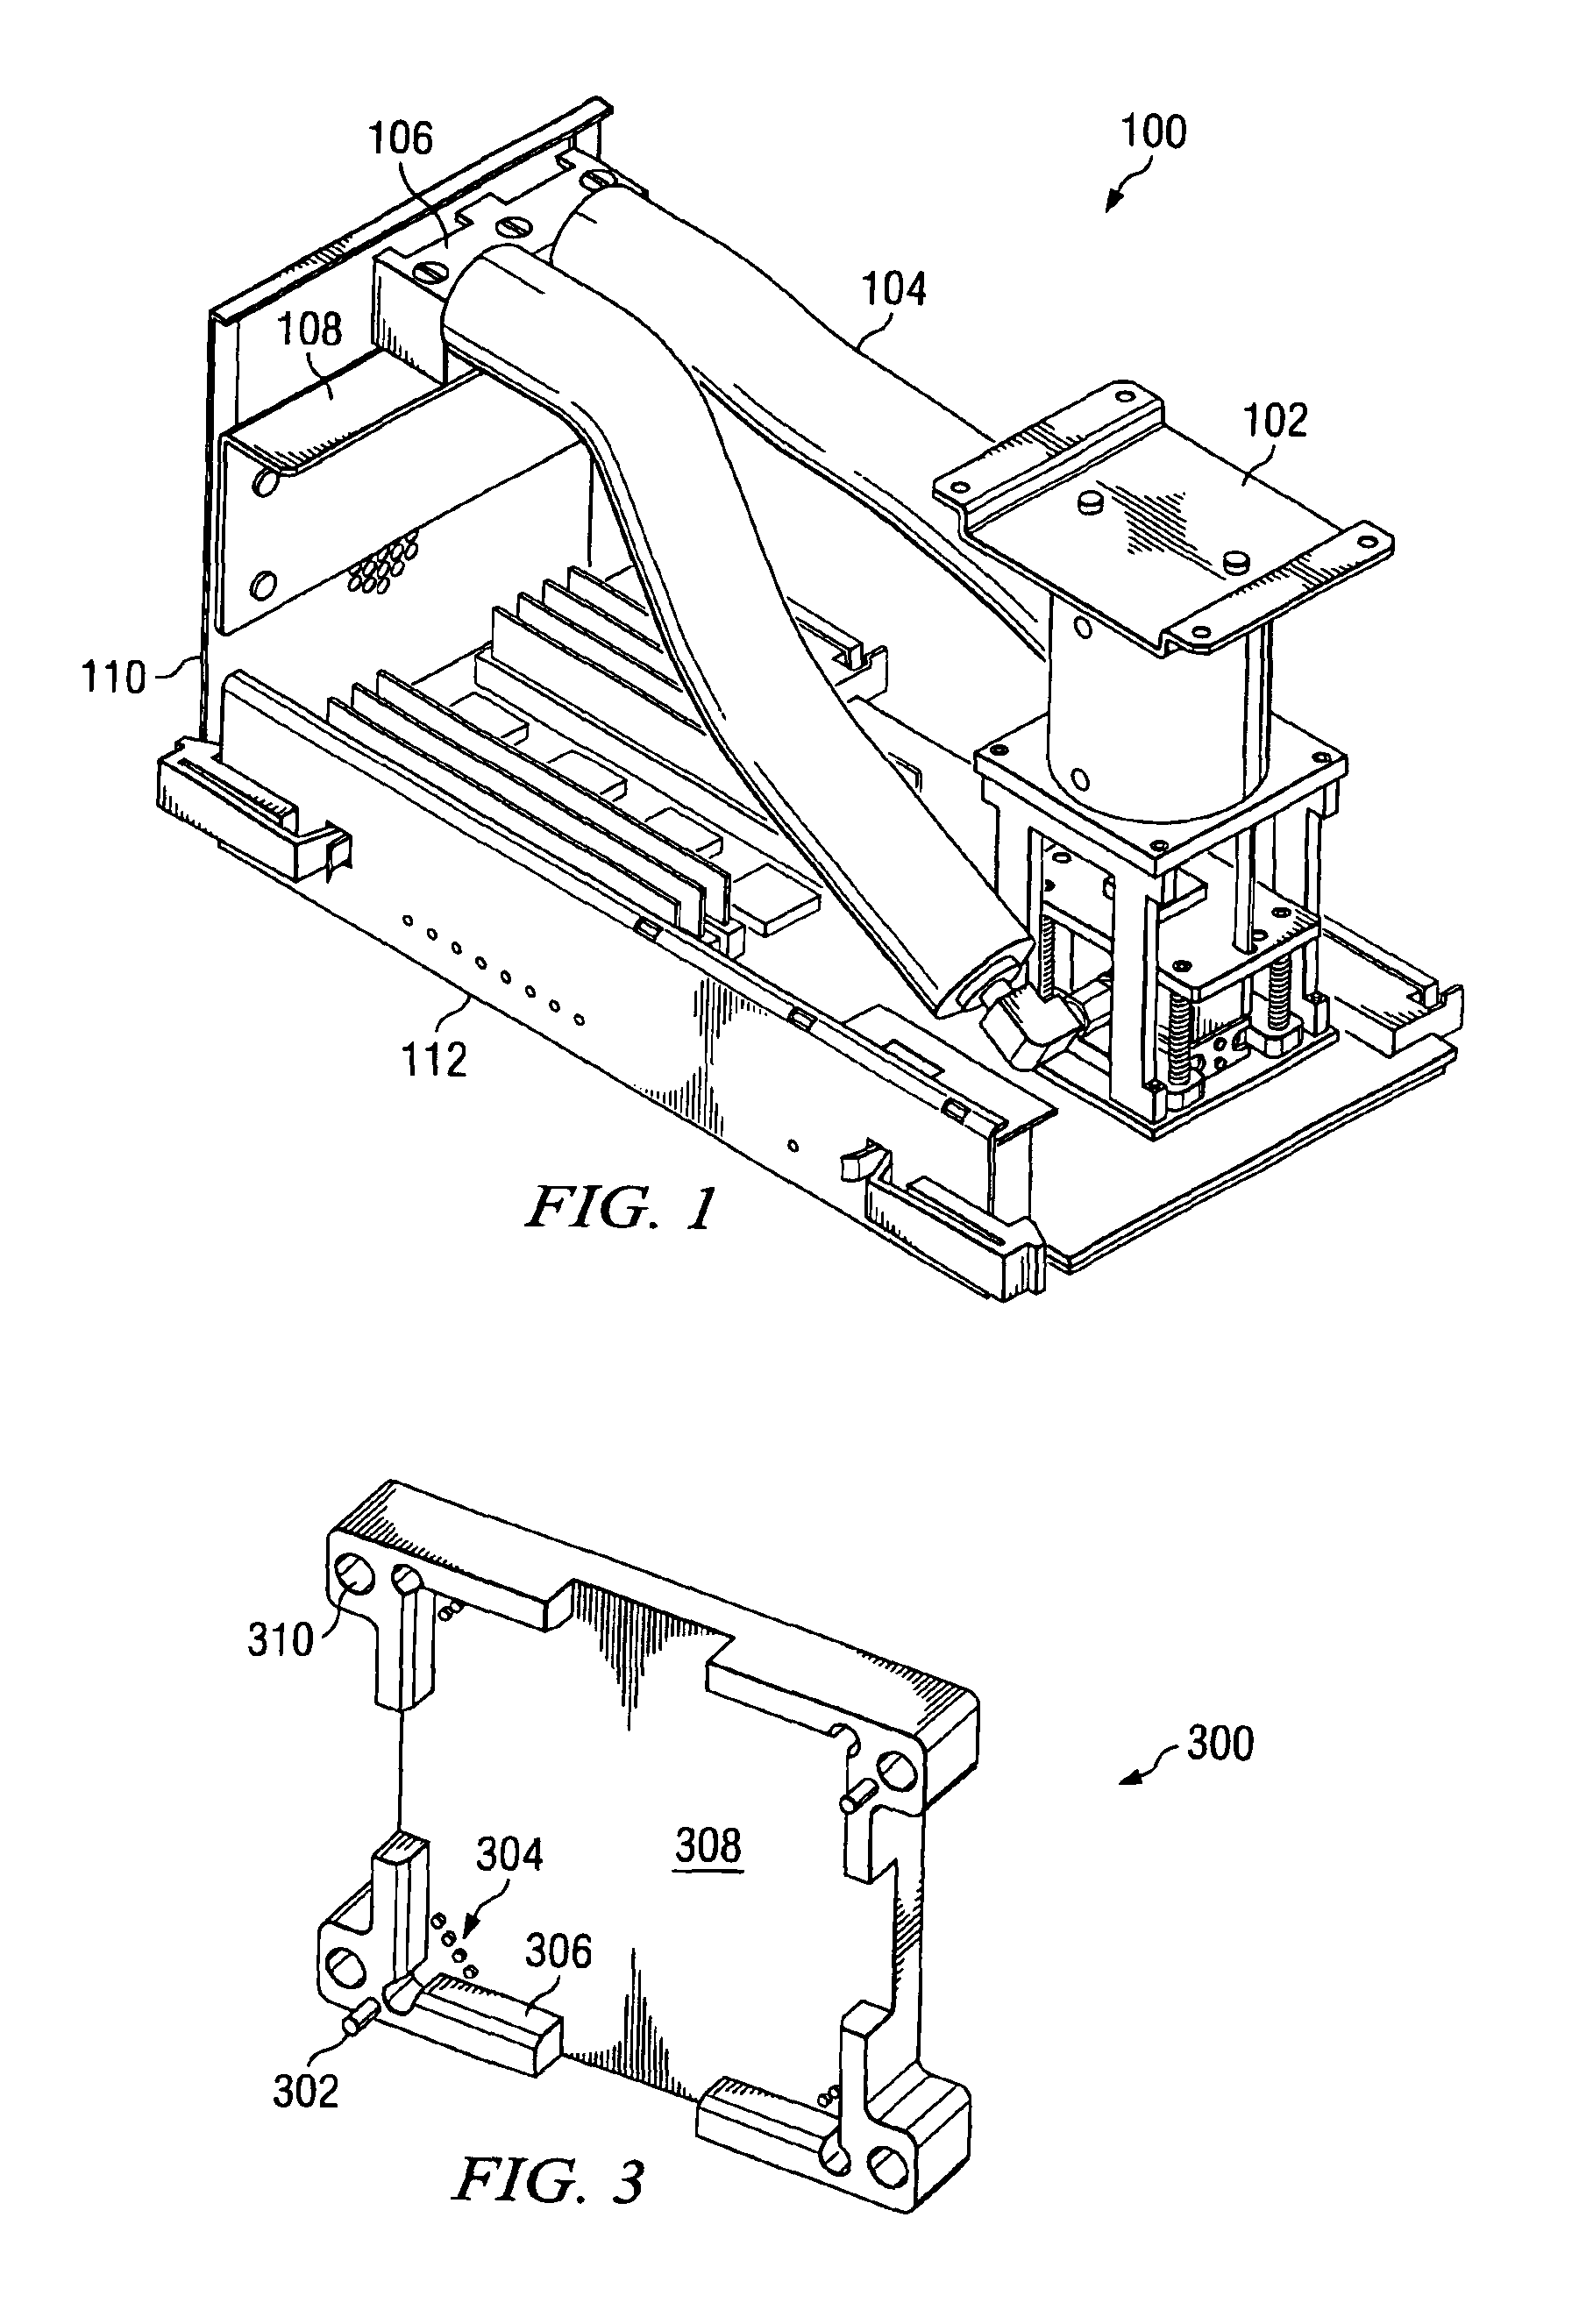 Apparatus for functional and stress testing of exposed chip land grid array devices